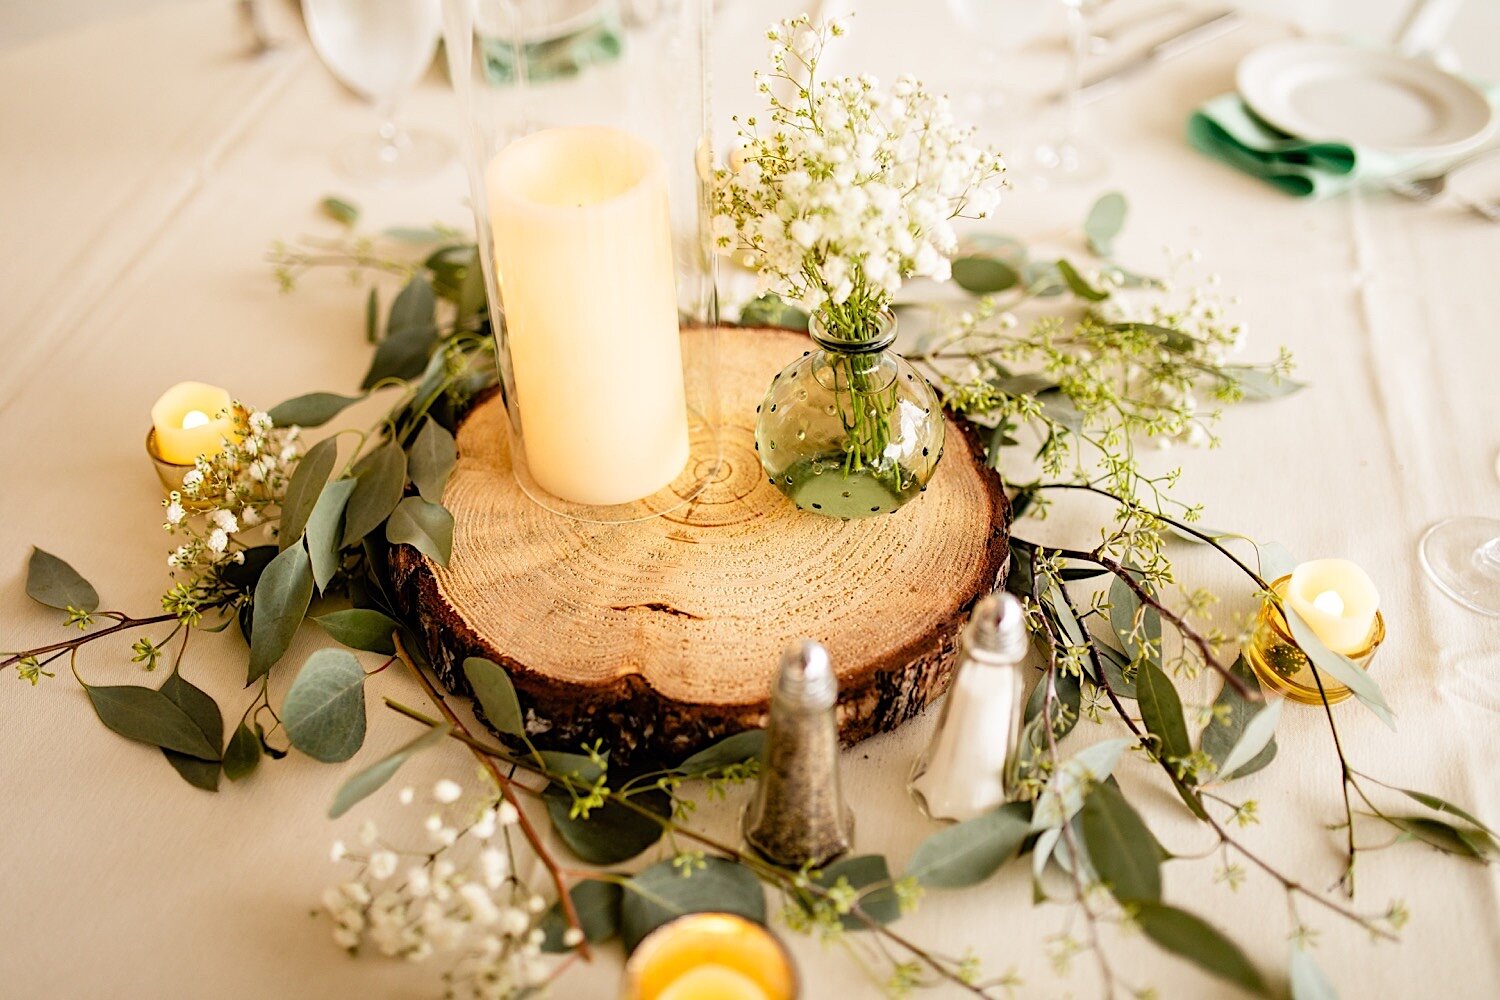  Wood round centerpieces, Simple centerpieces, Catholic Colorado Wedding Ceremony at Saint Francis of Assisi and Reception at Arrowhead Golf Club, Colorado Wedding Planner, Colorado Wedding Planning, Colorado Wedding, Denver Wedding, Wedding Inspirat